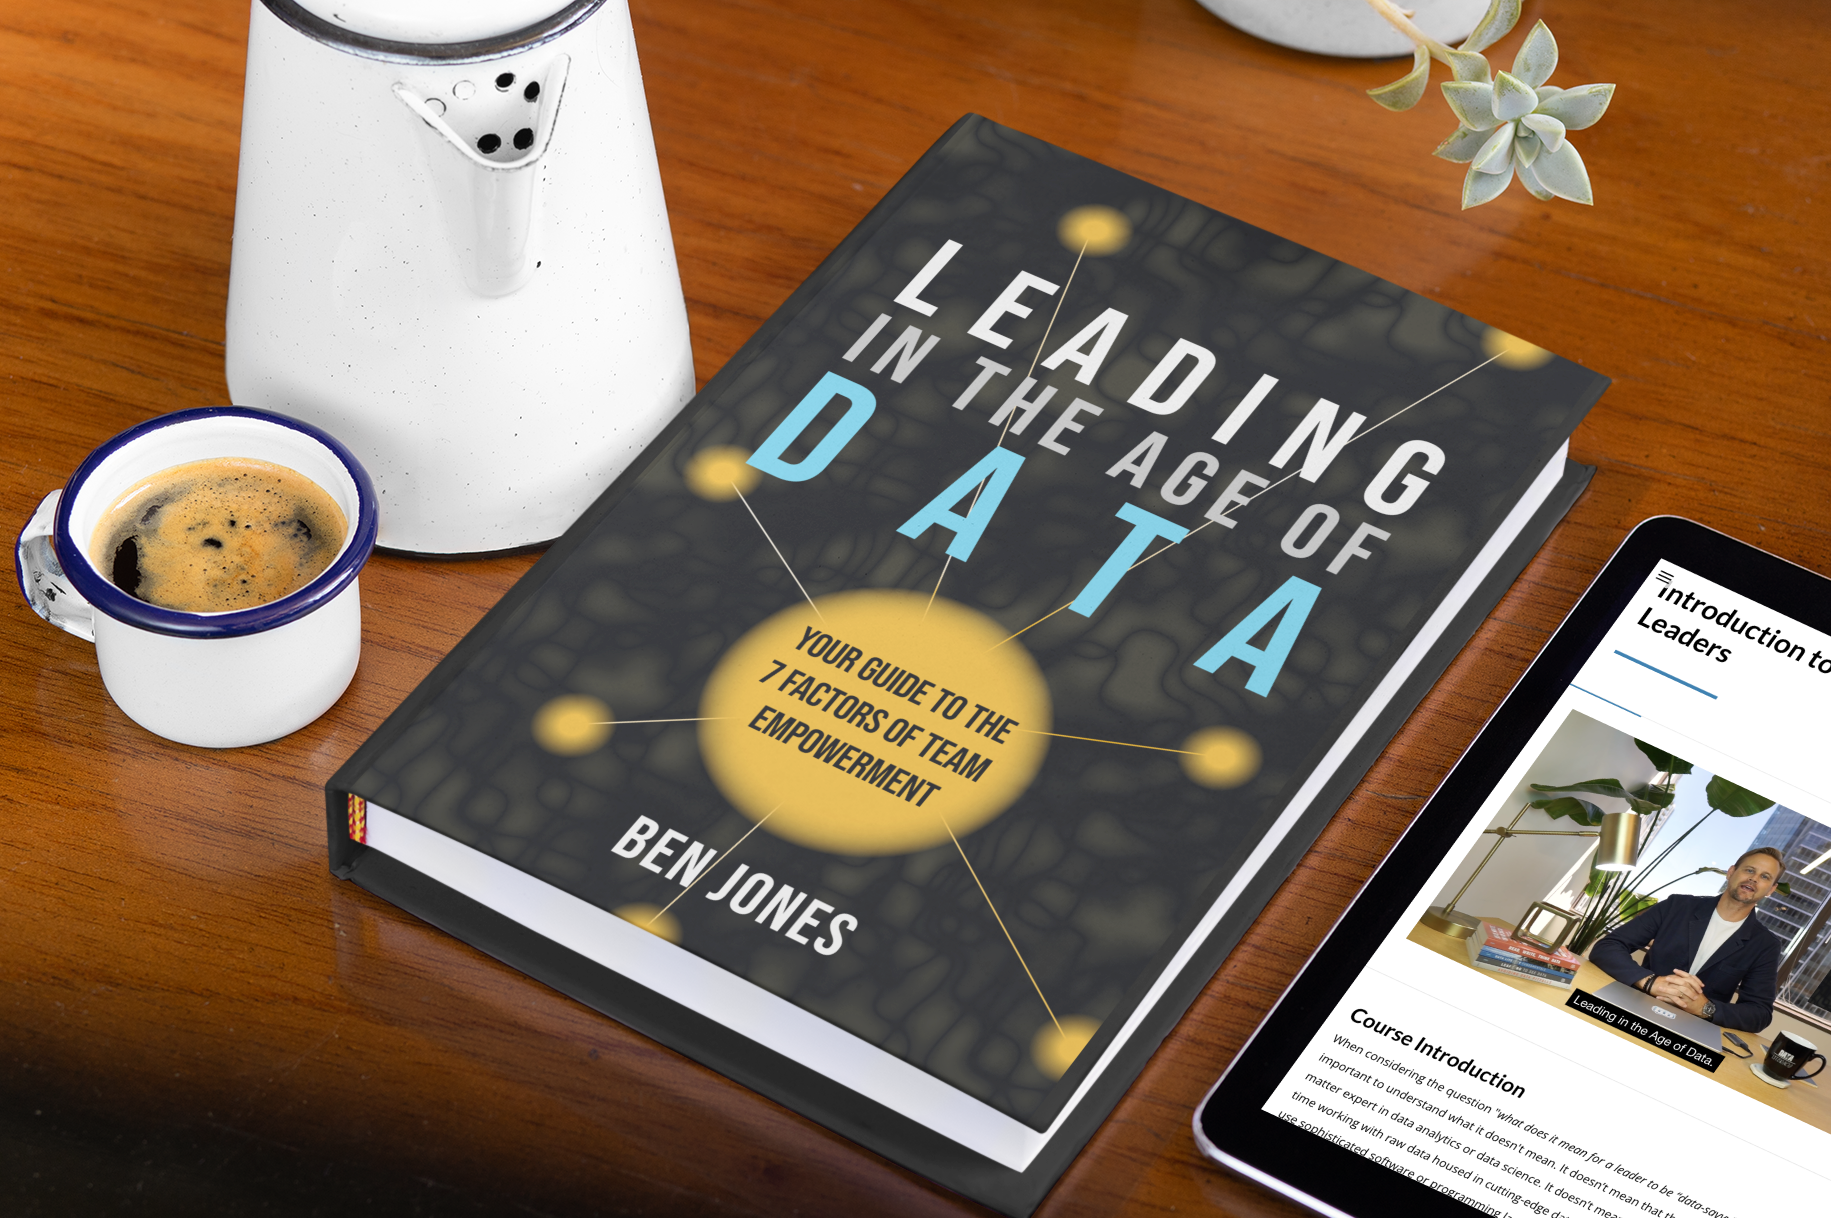 image of leading in the age of data book by ben jones on a table